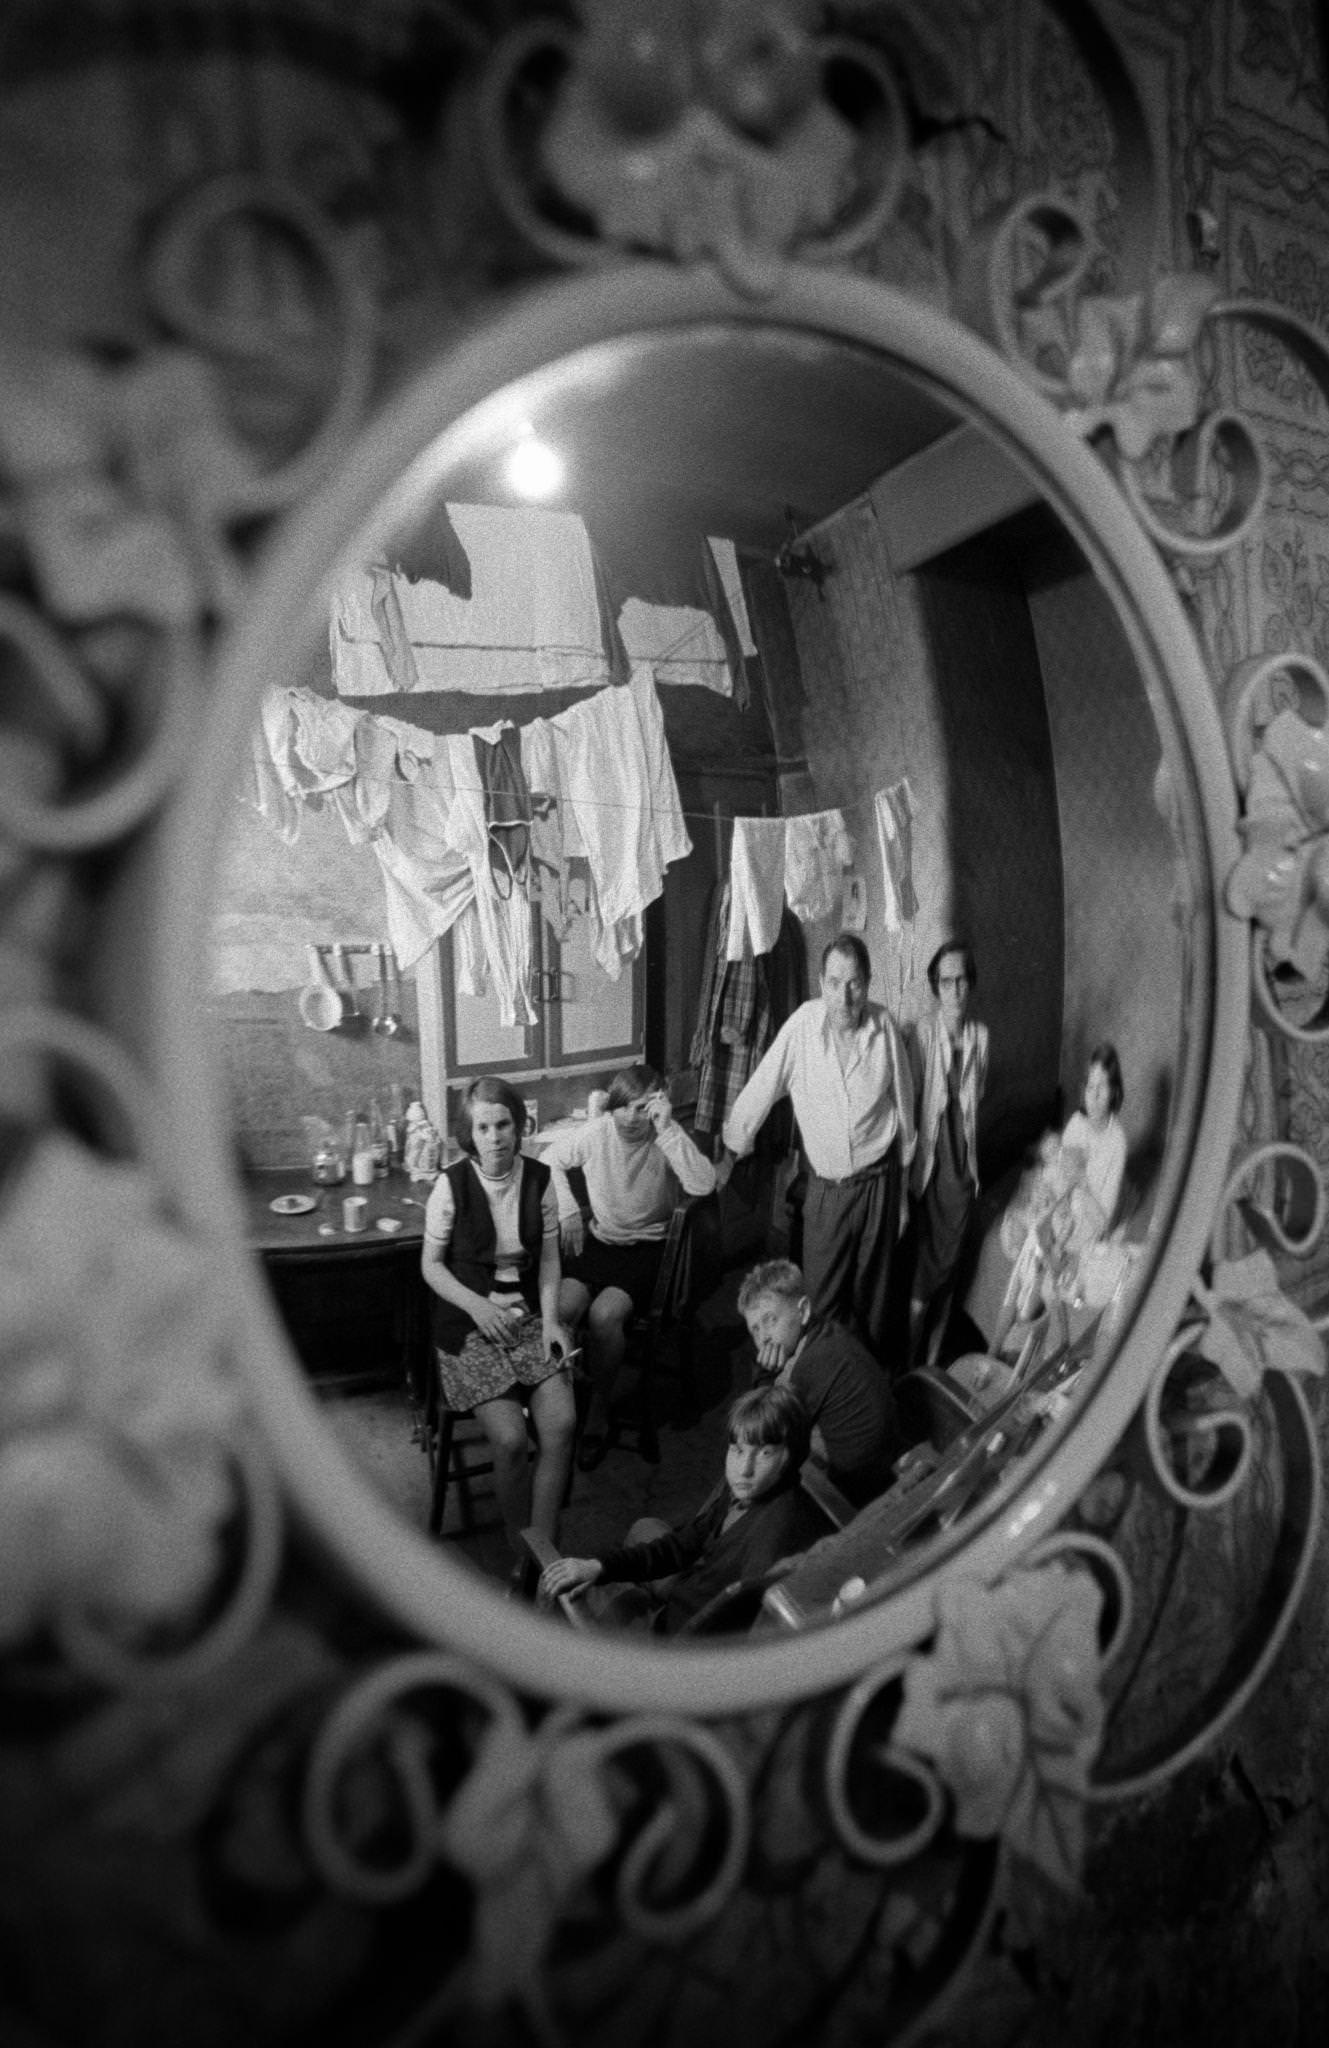 A family of eight reflected in a mirror in their home in the notorious Gorbals district of Glasgow in 1969.